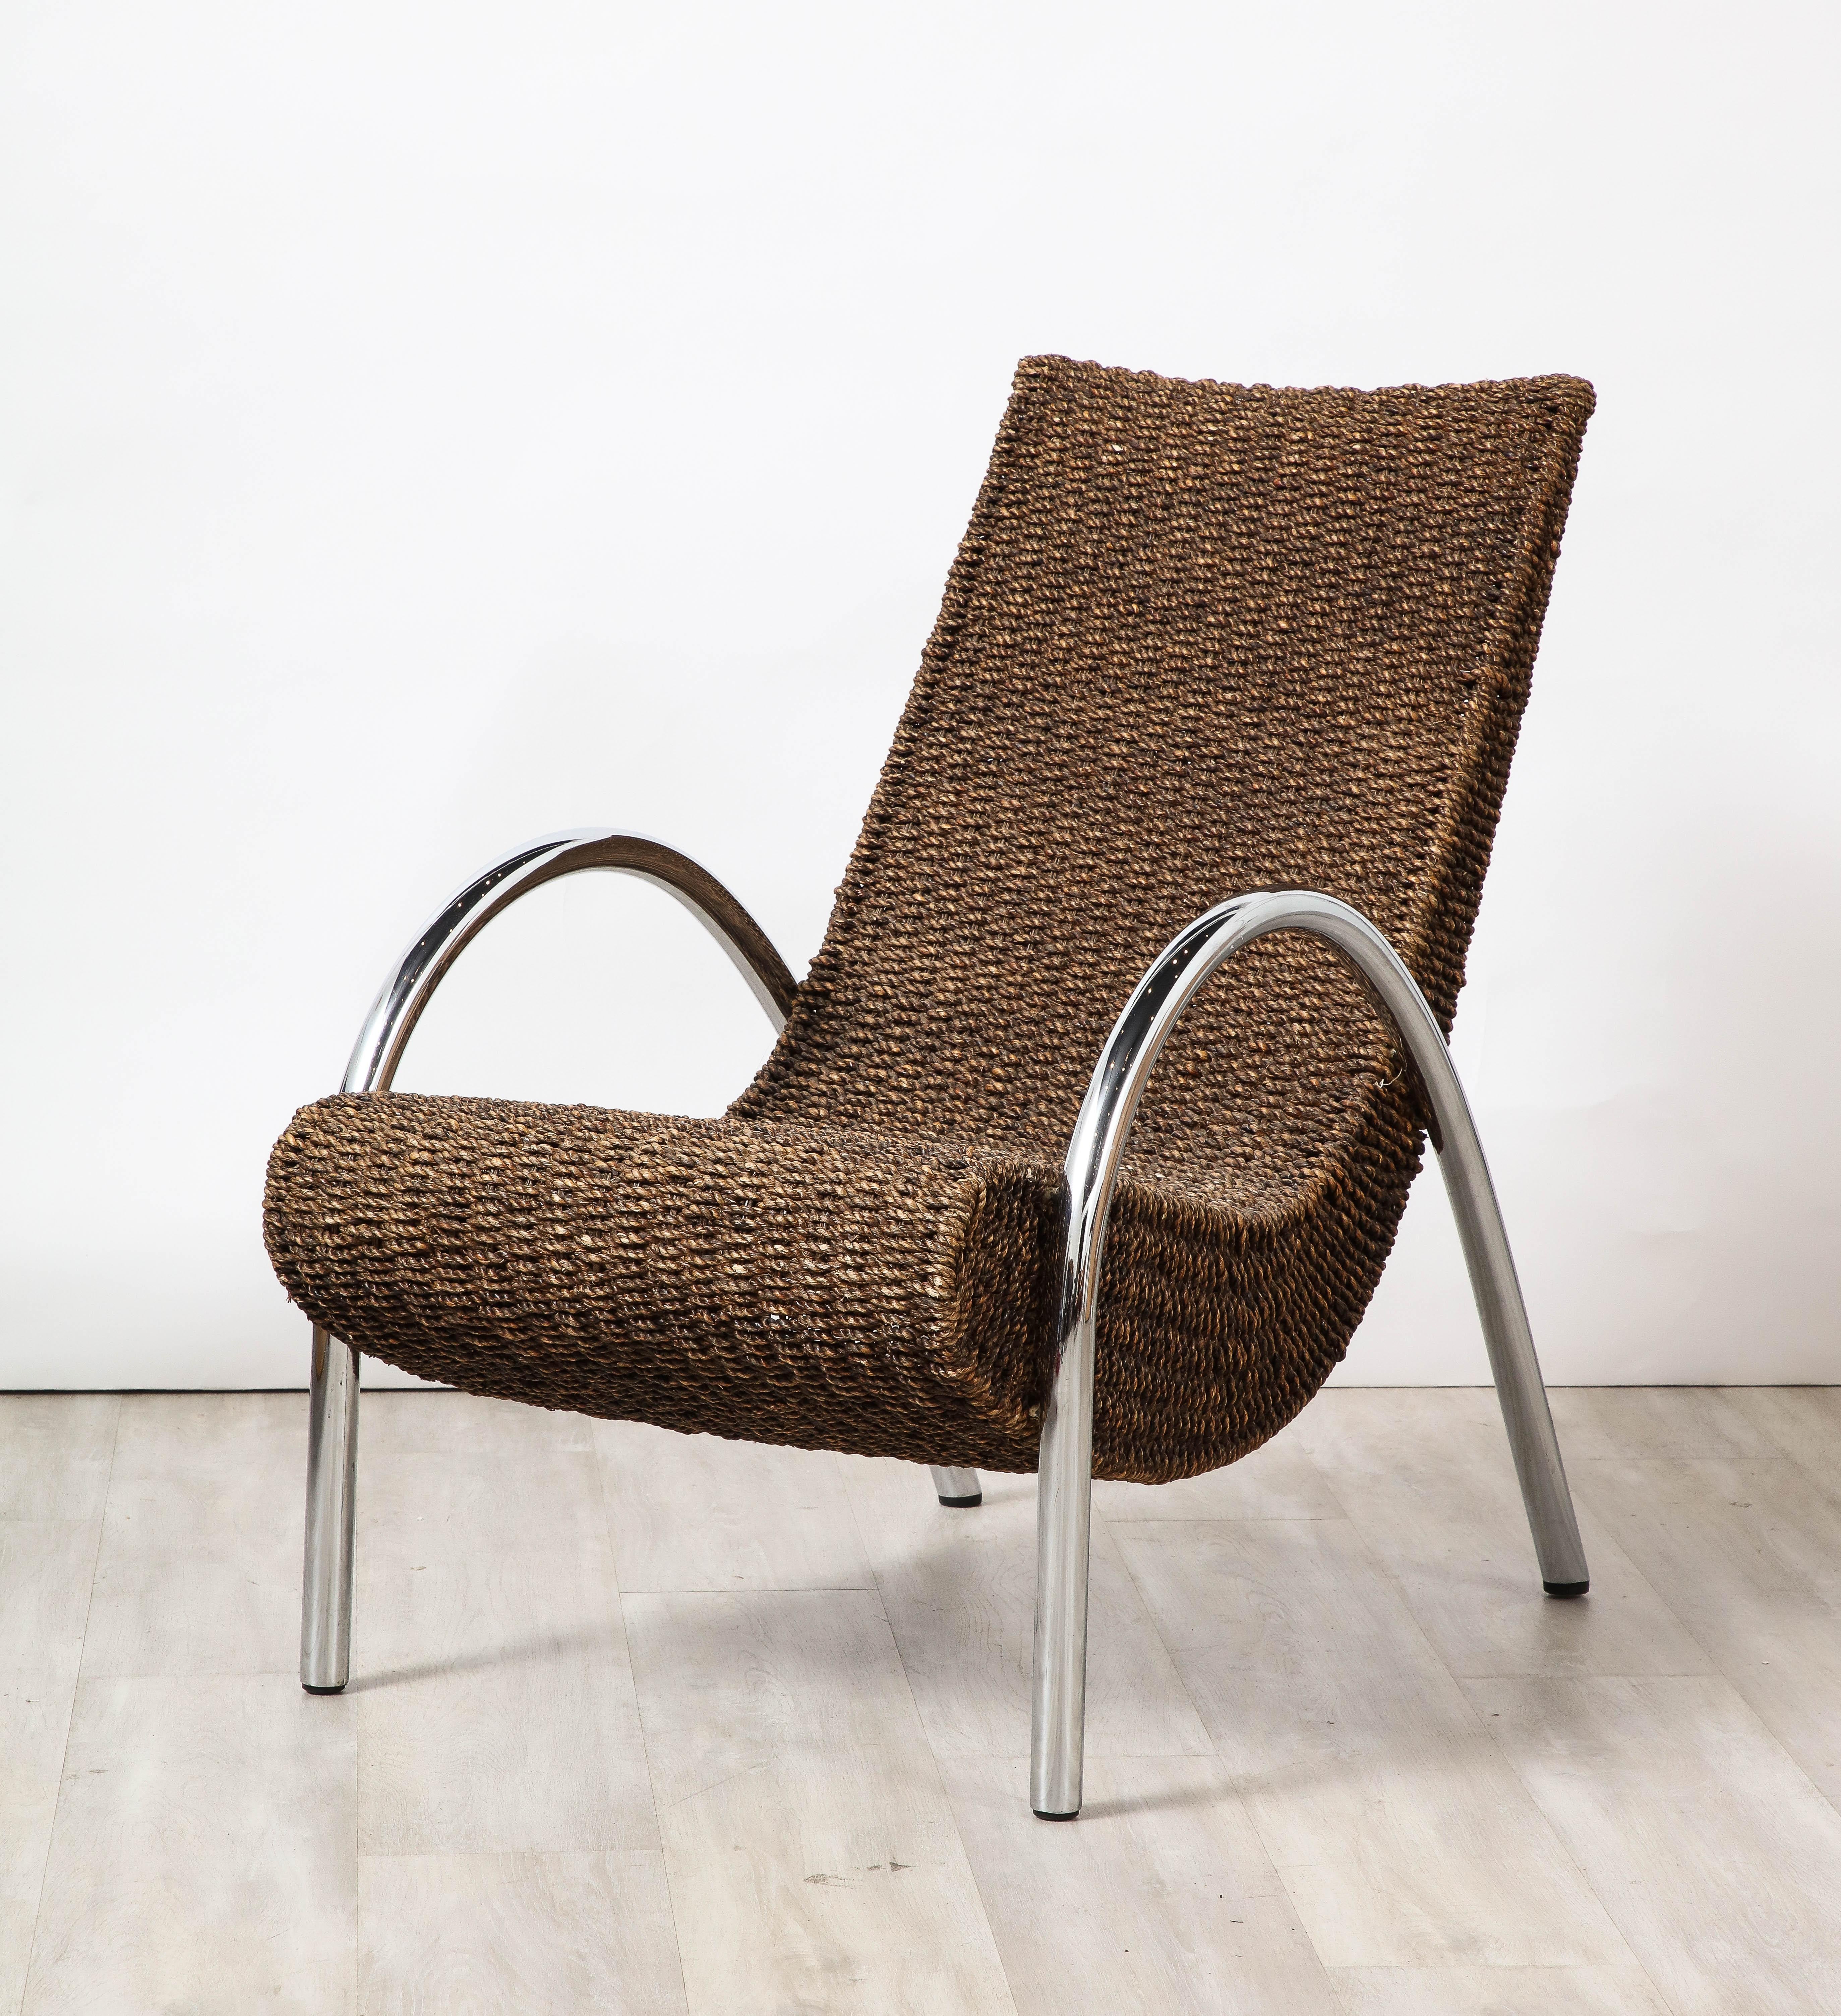 Spanish Bamboo and Chrome Lounge Chair with Ottoman, Spain, circa 1960 For Sale 14